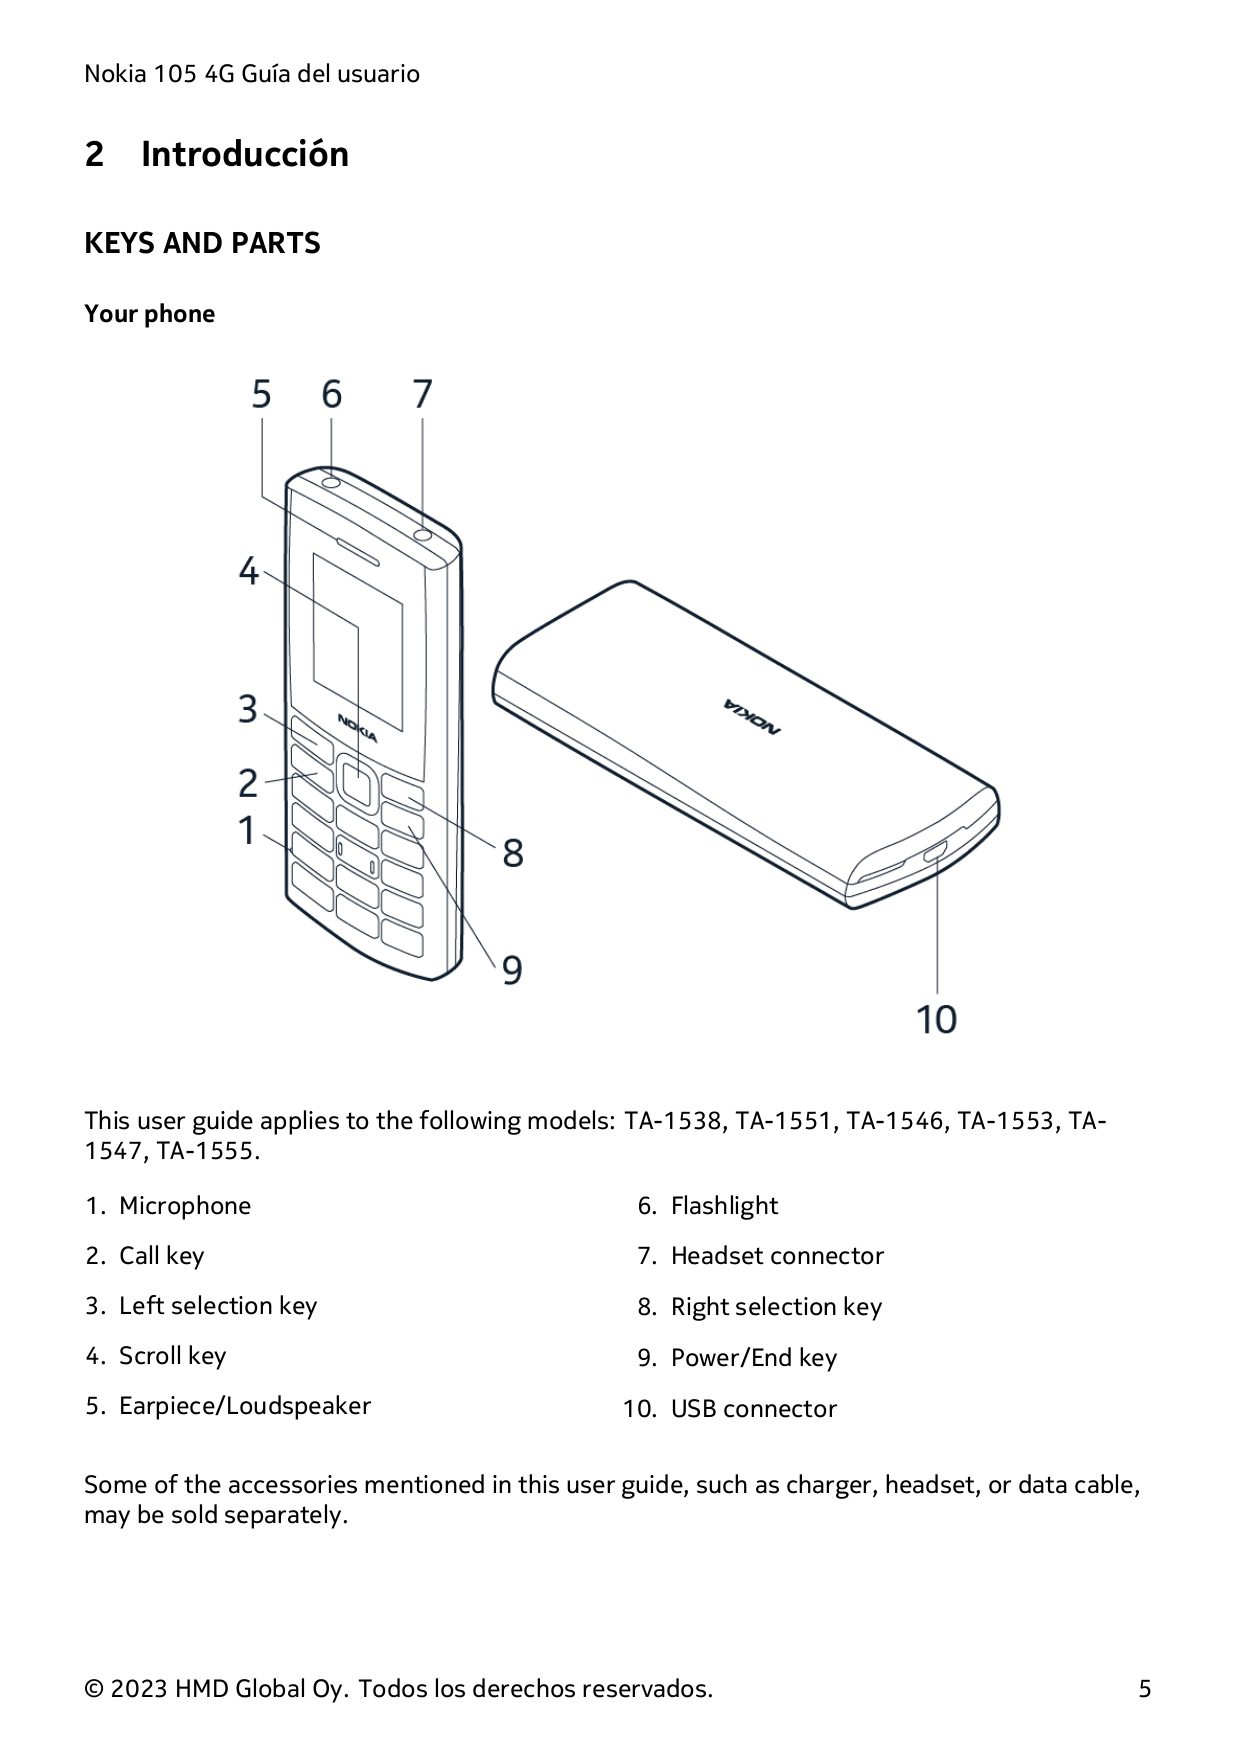 Nokia 105 4G Guía del usuario2IntroducciónKEYS AND PARTSYour phoneThis user guide applies to the following models: TA-1538, TA-1